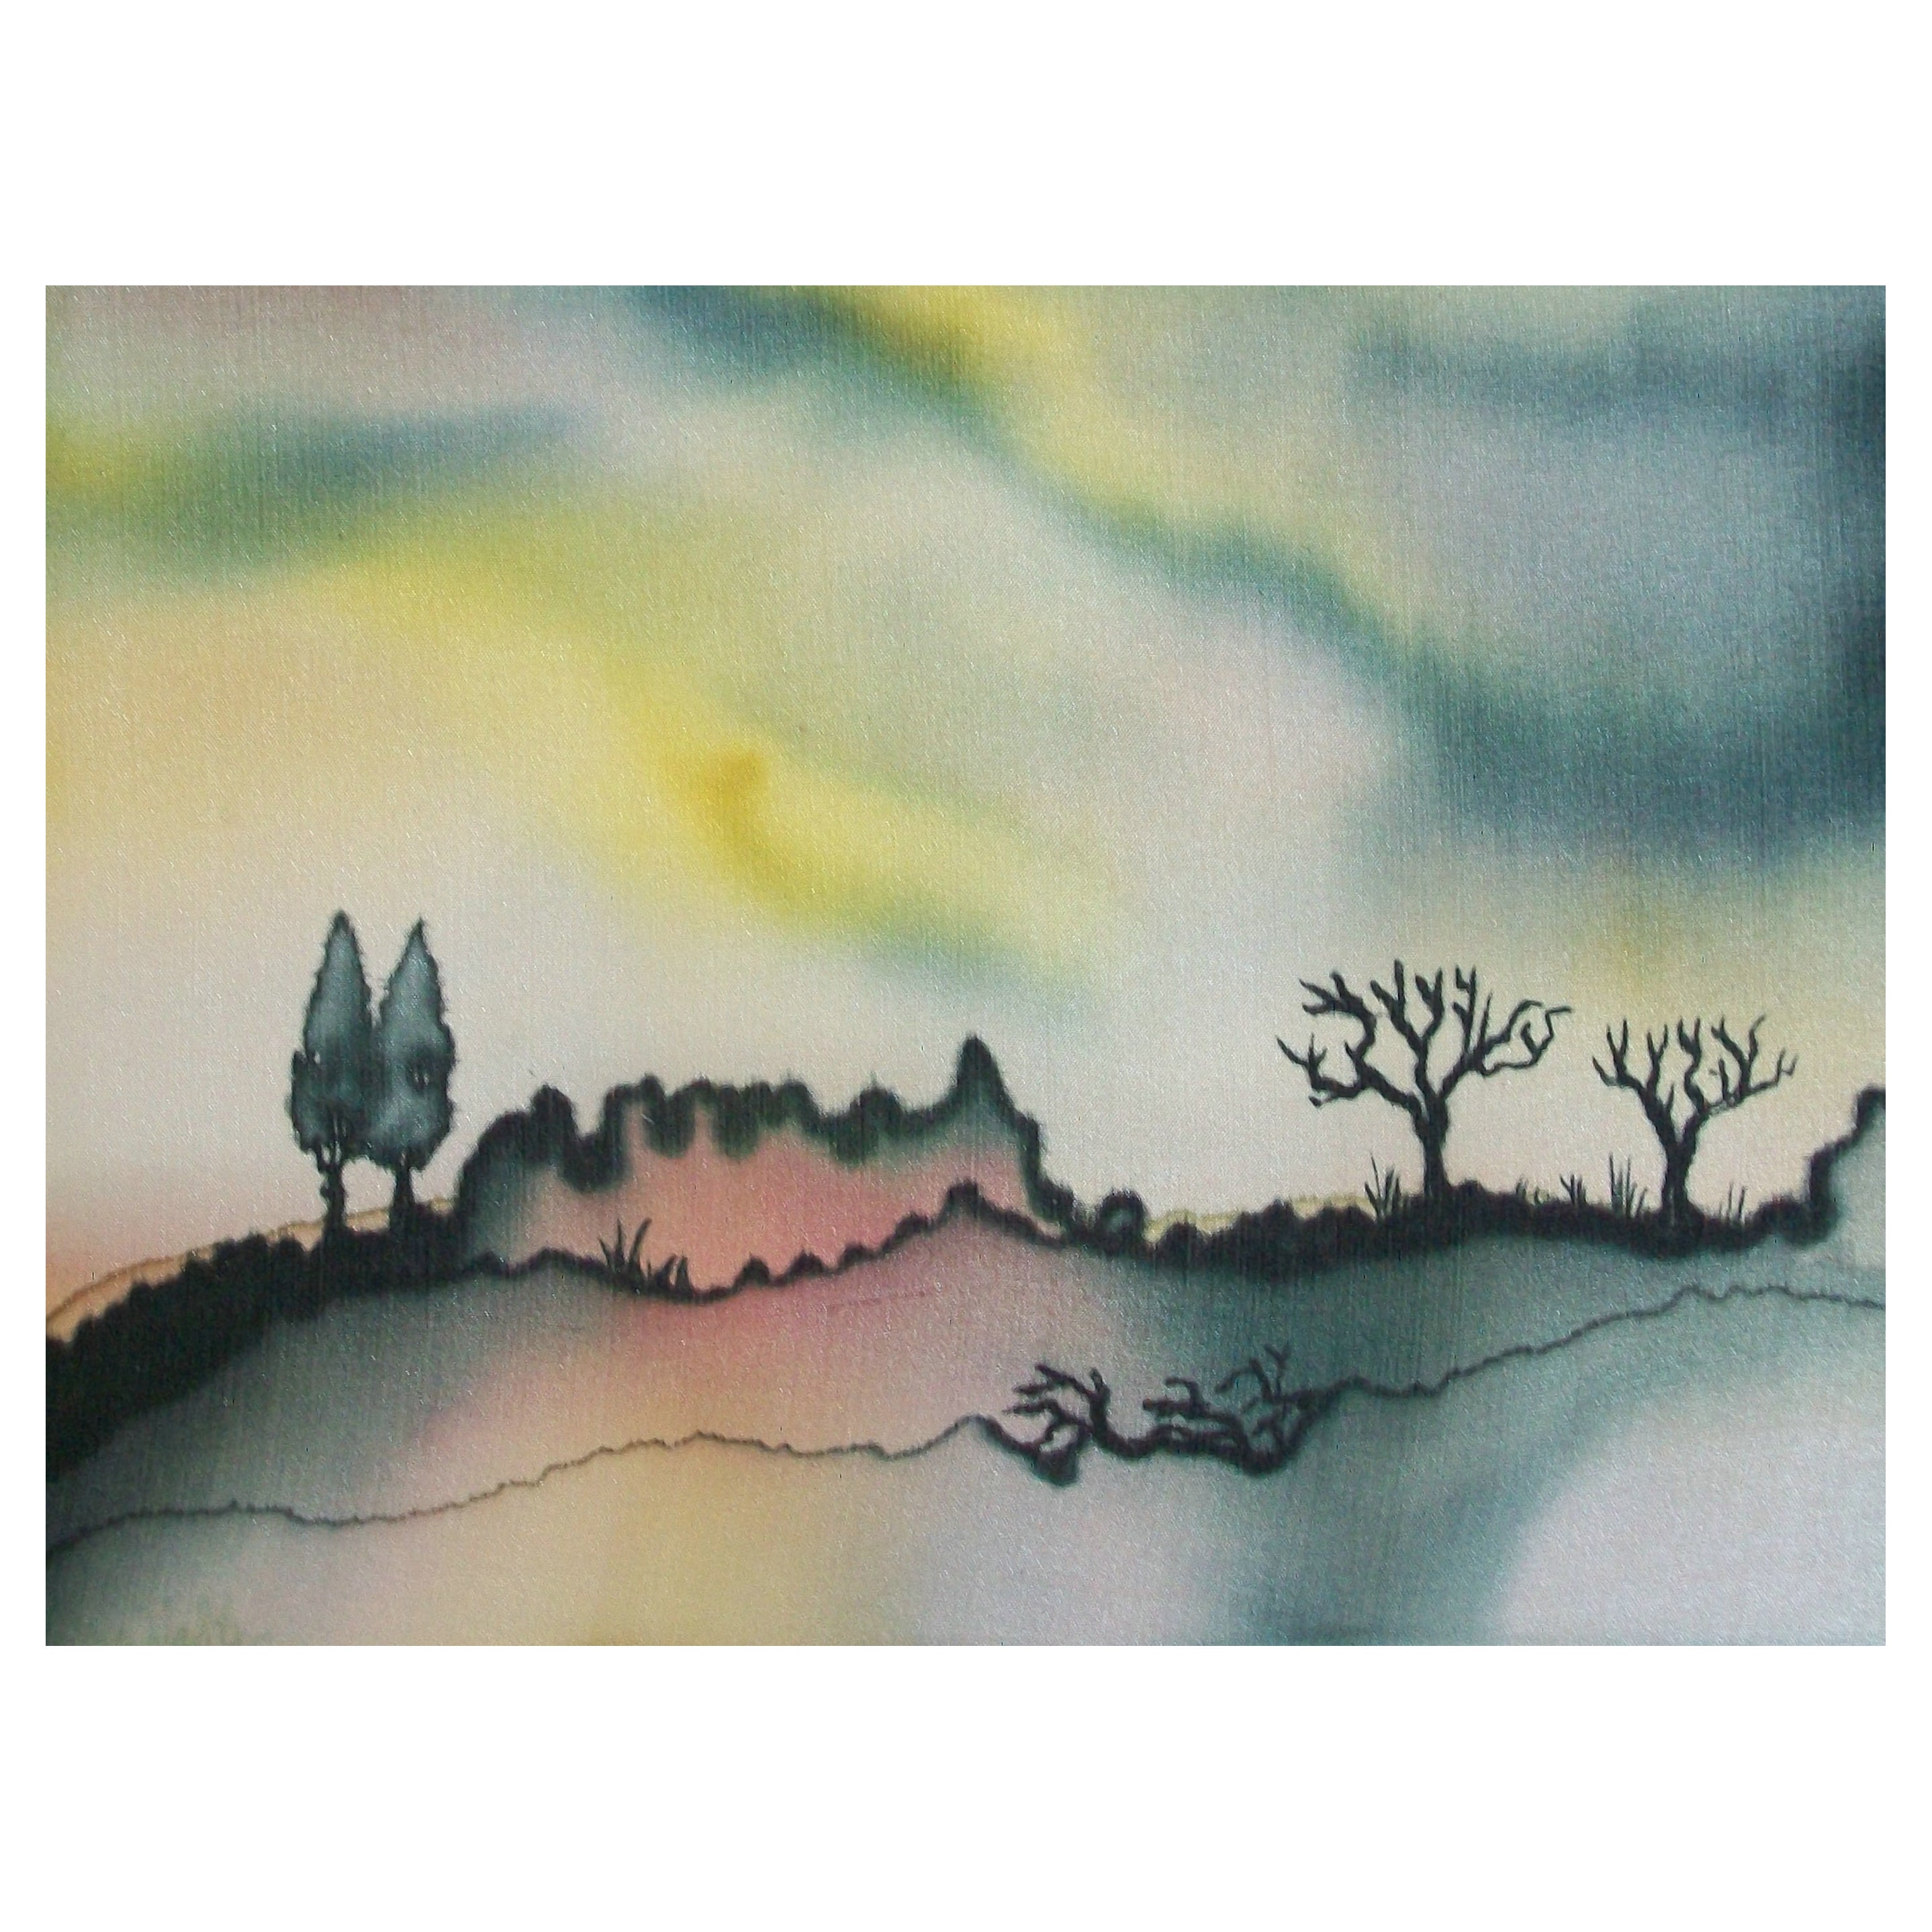 German Expressionist Landscape Painting on Silk, Unsigned, Mid 20th Century For Sale